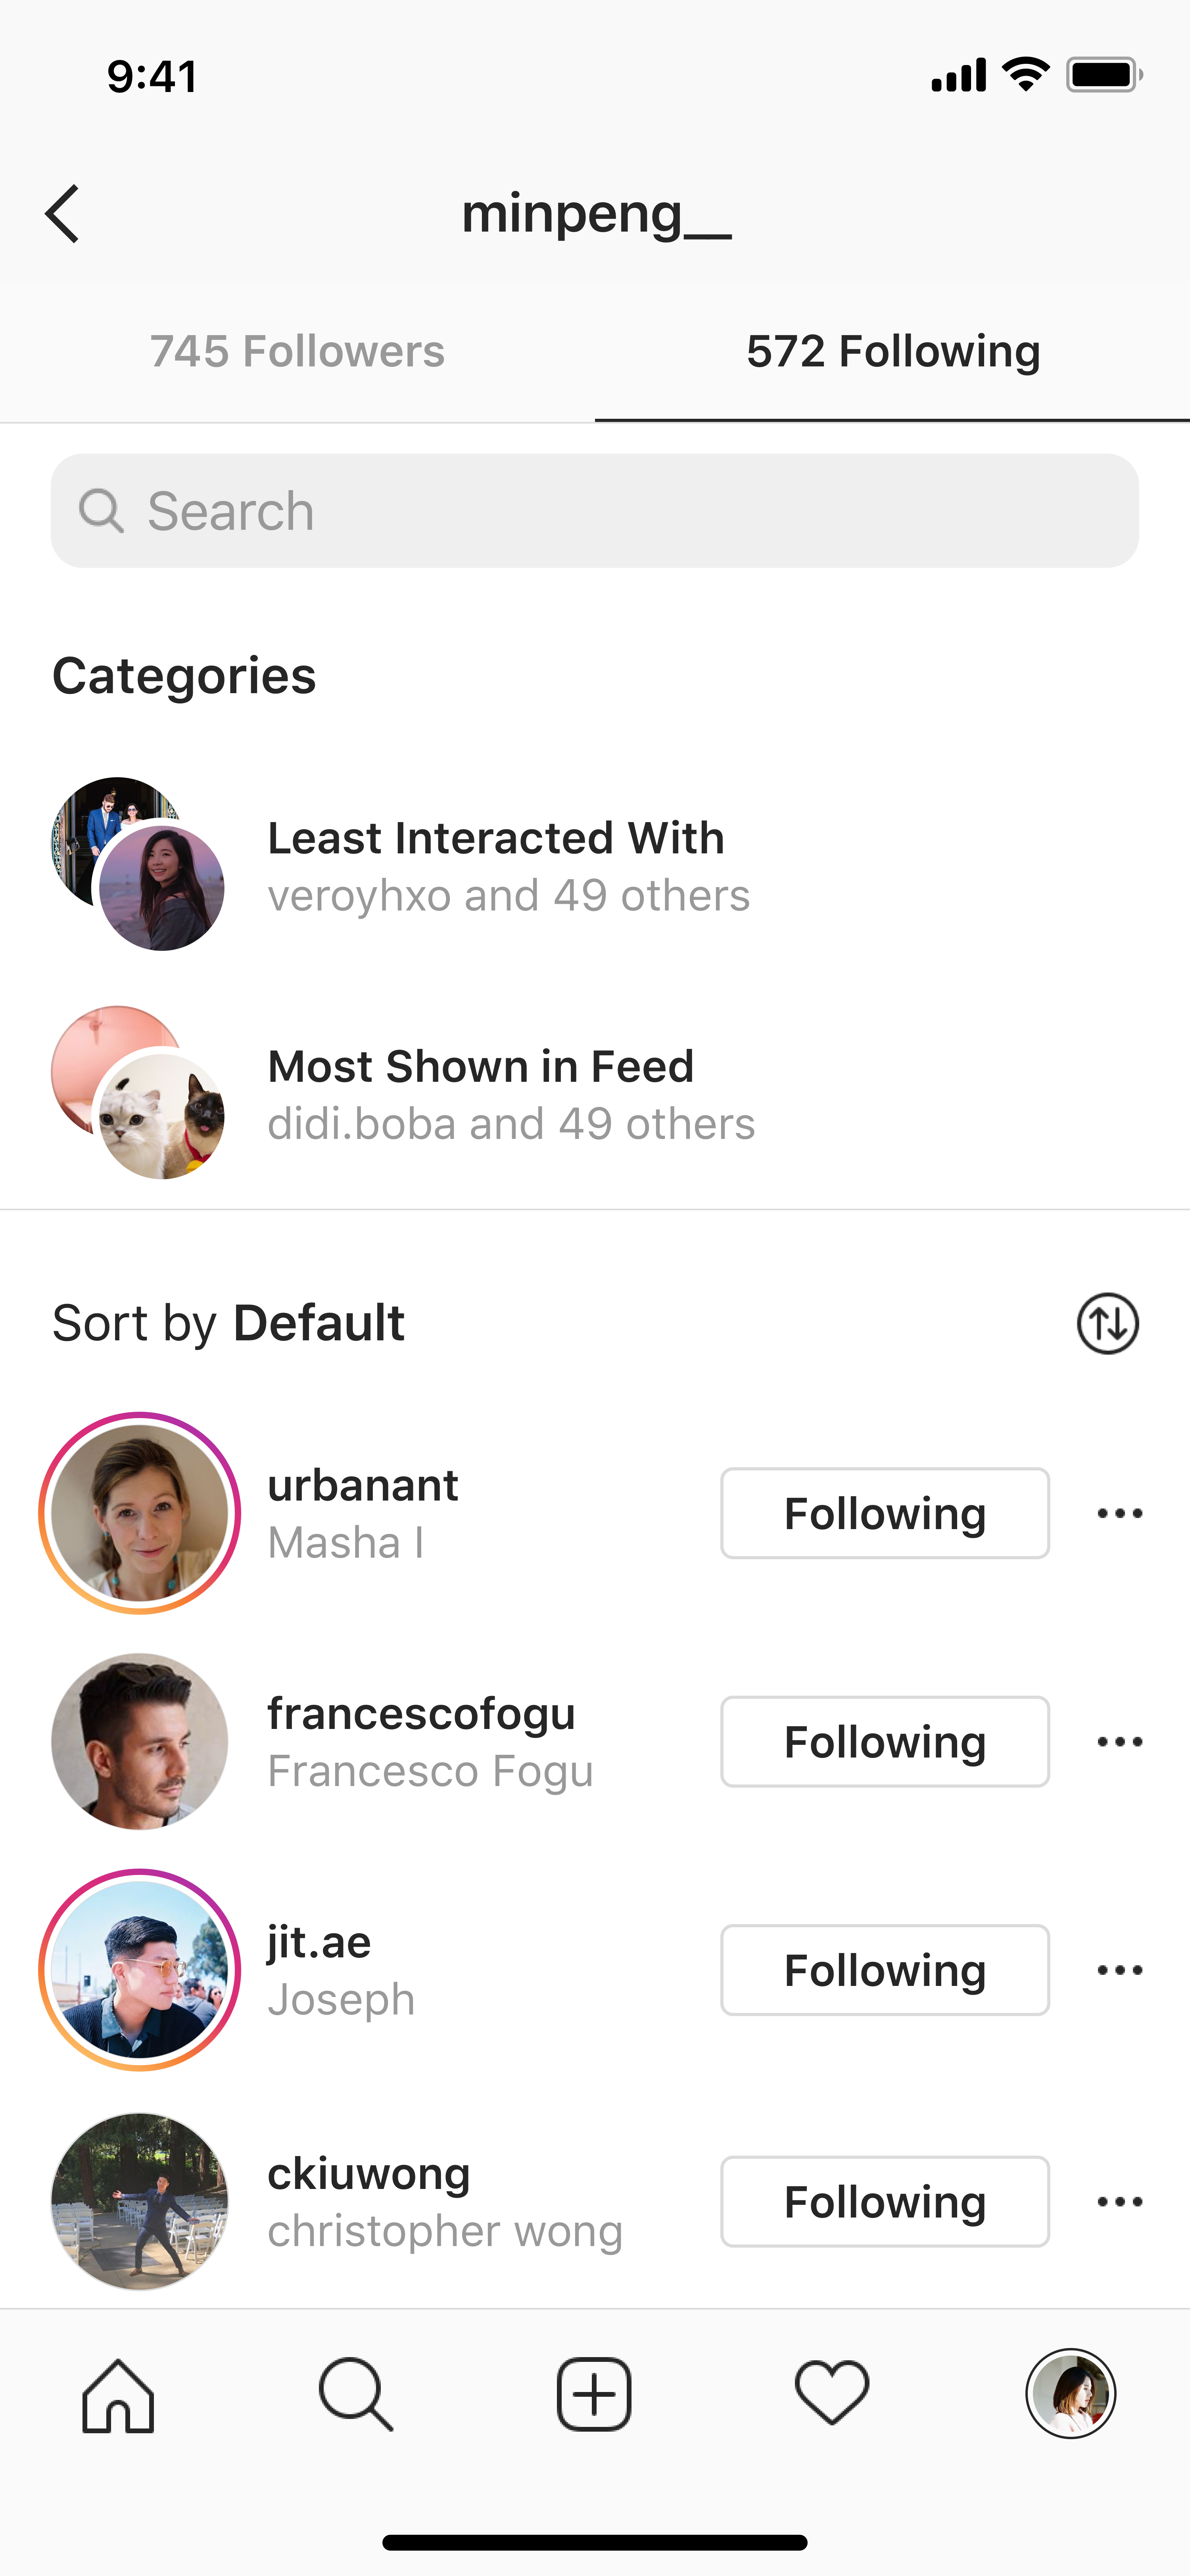 Instagram's new account management tools which show users which accounts they interact with the least.